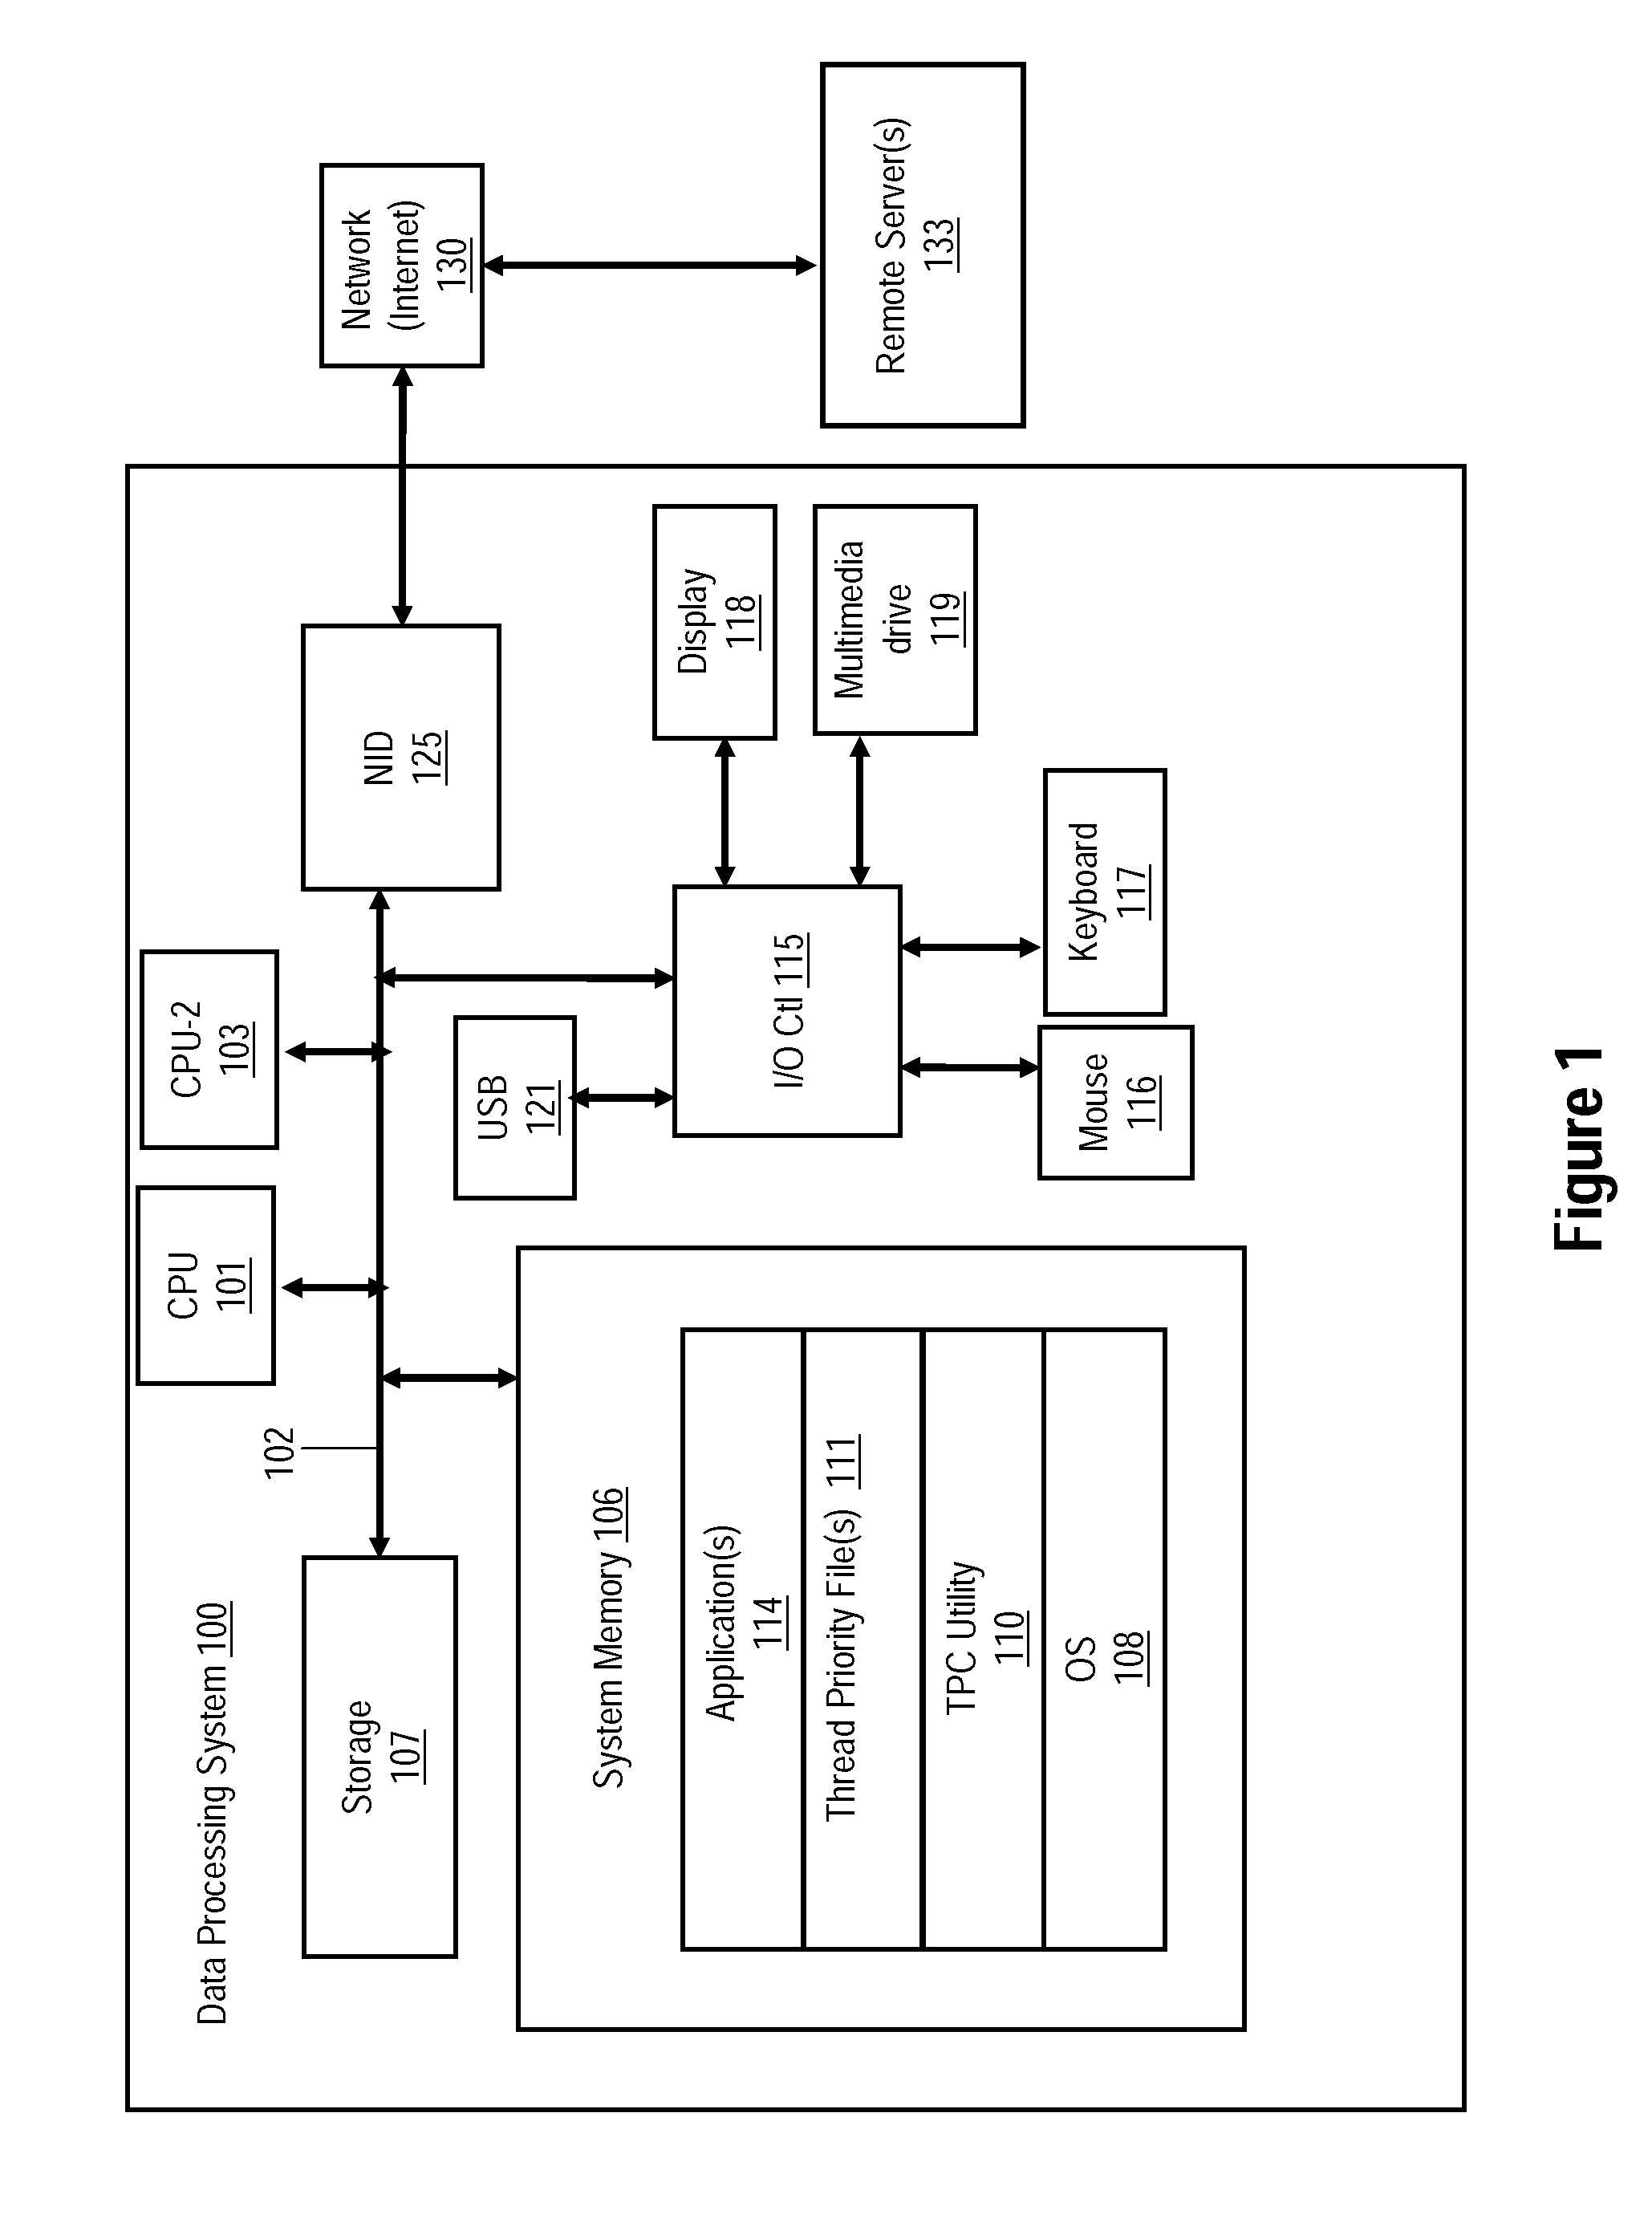 Mechanism to control hardware multi-threaded priority by system call